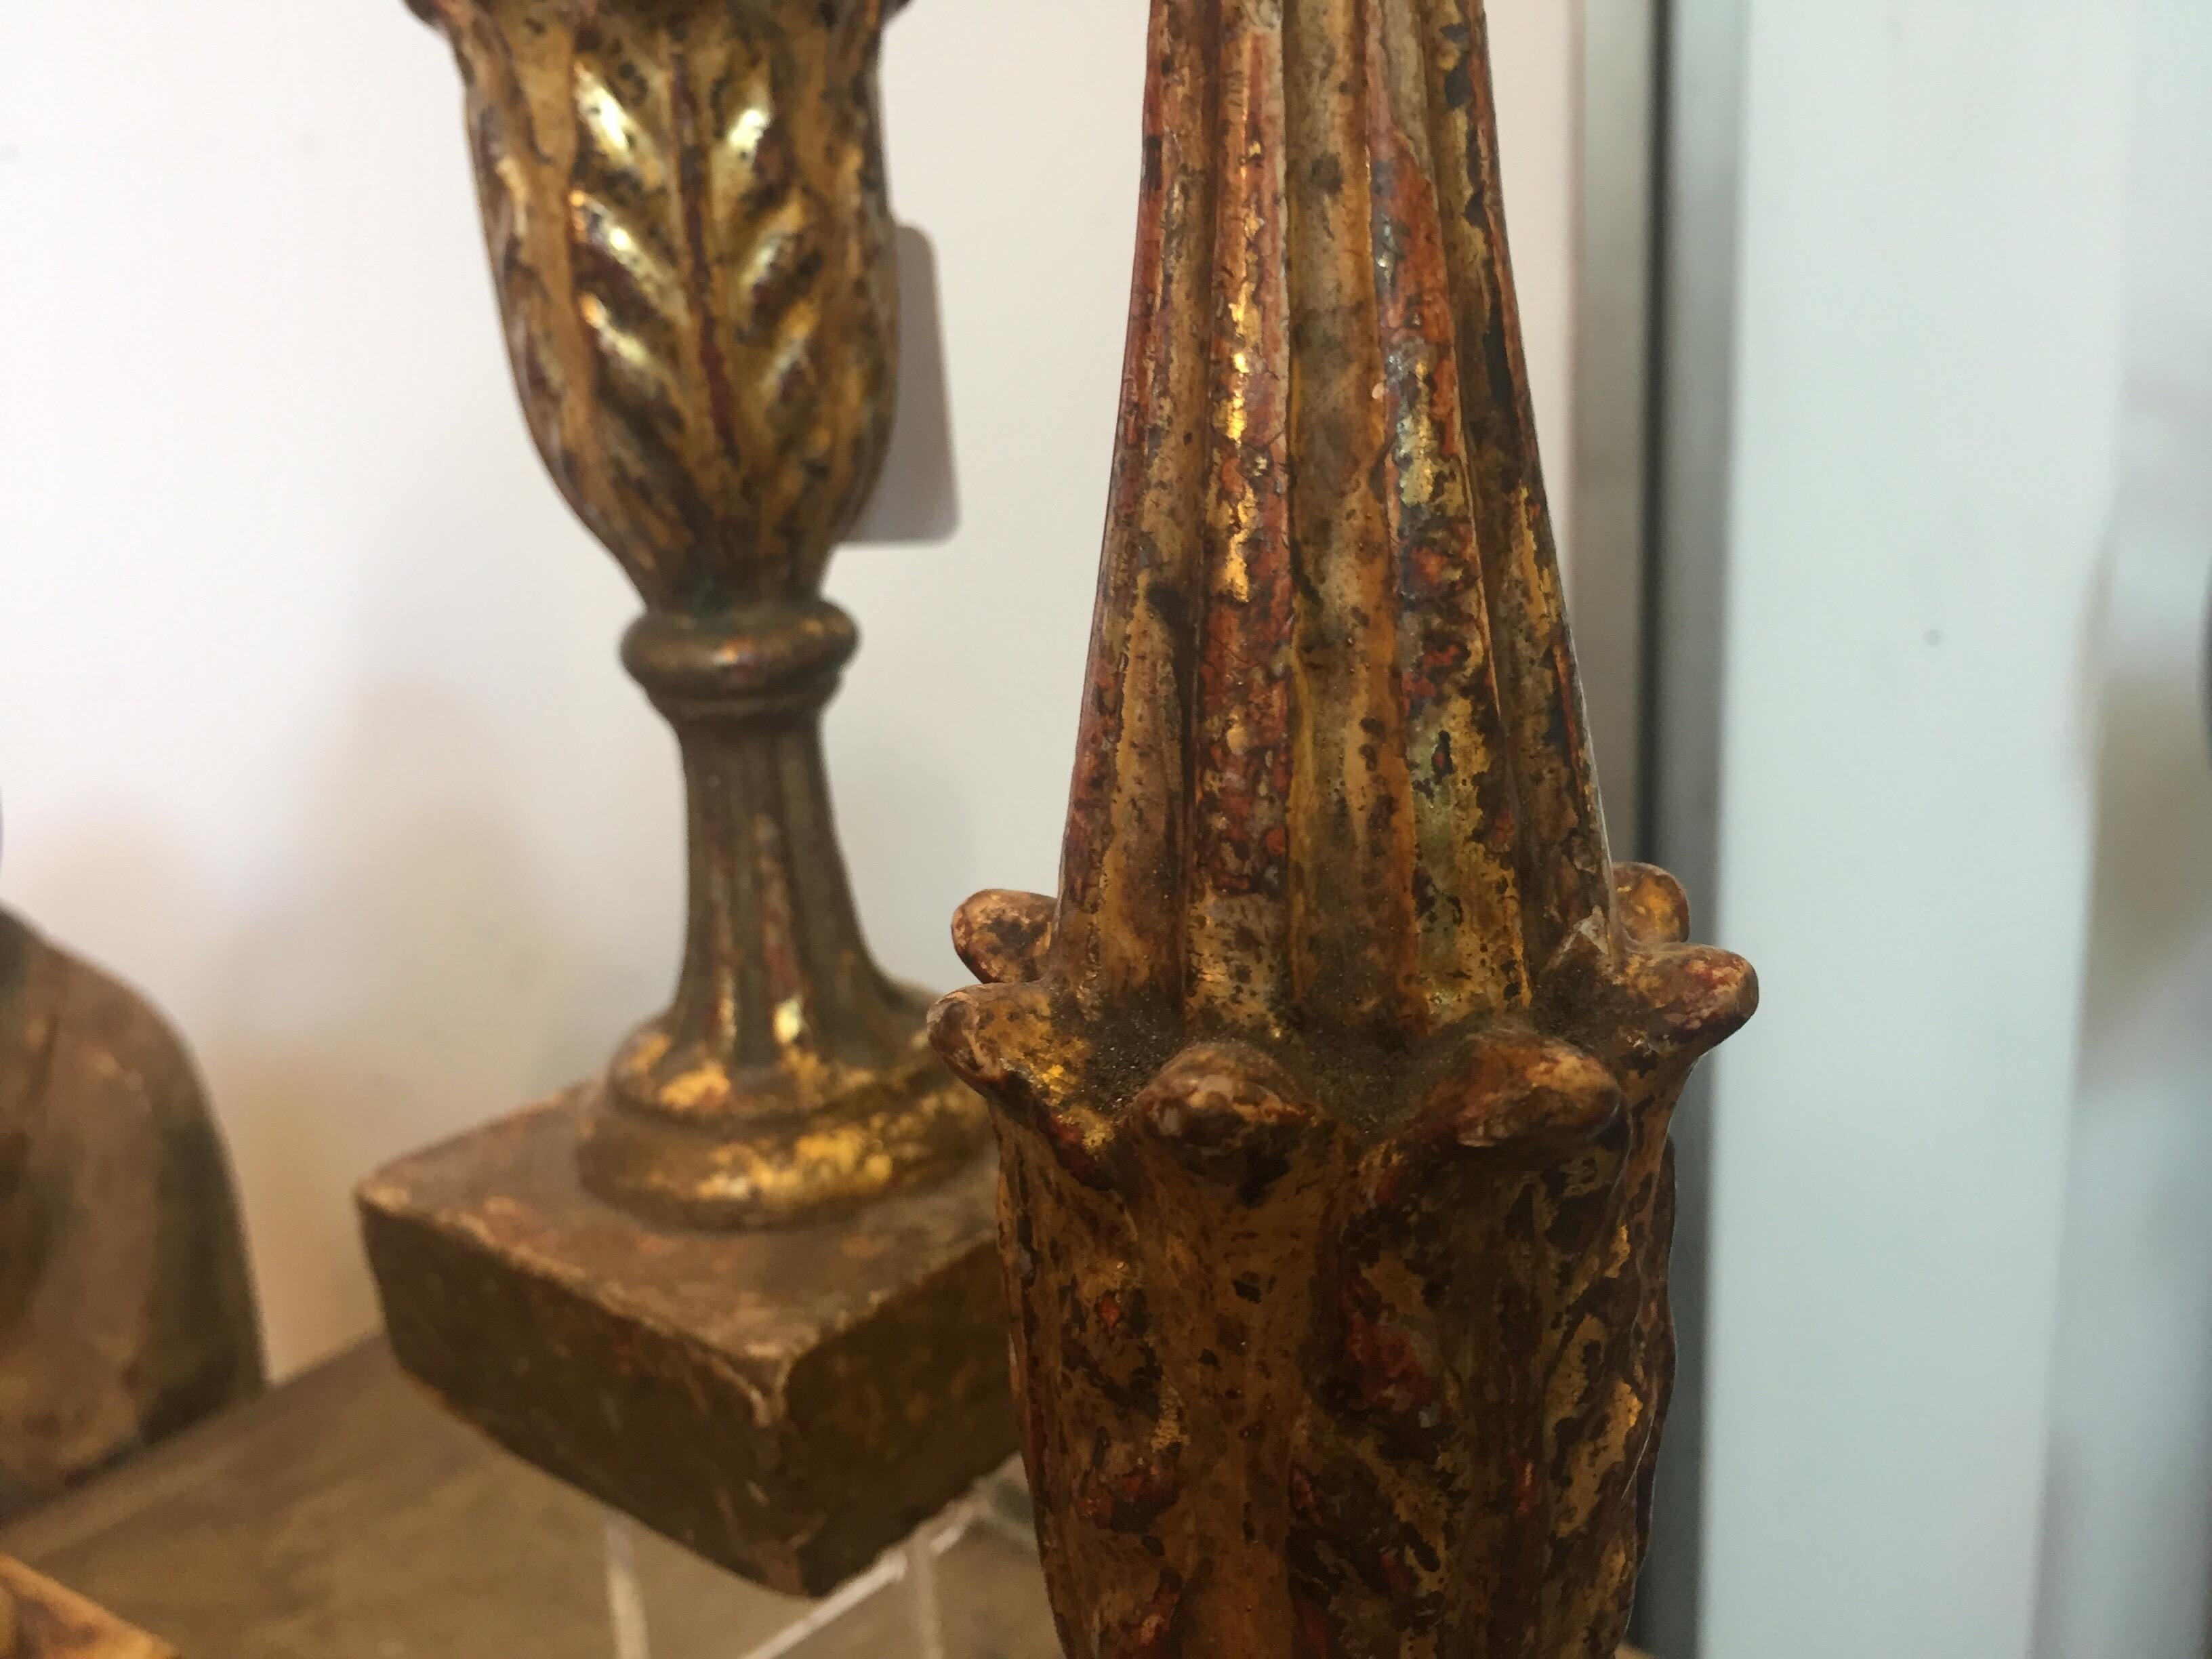 Two hand carved wooden candlesticks made in Sicily in 18th century, in the early 20th century they have been electrified to be used as a lamp.